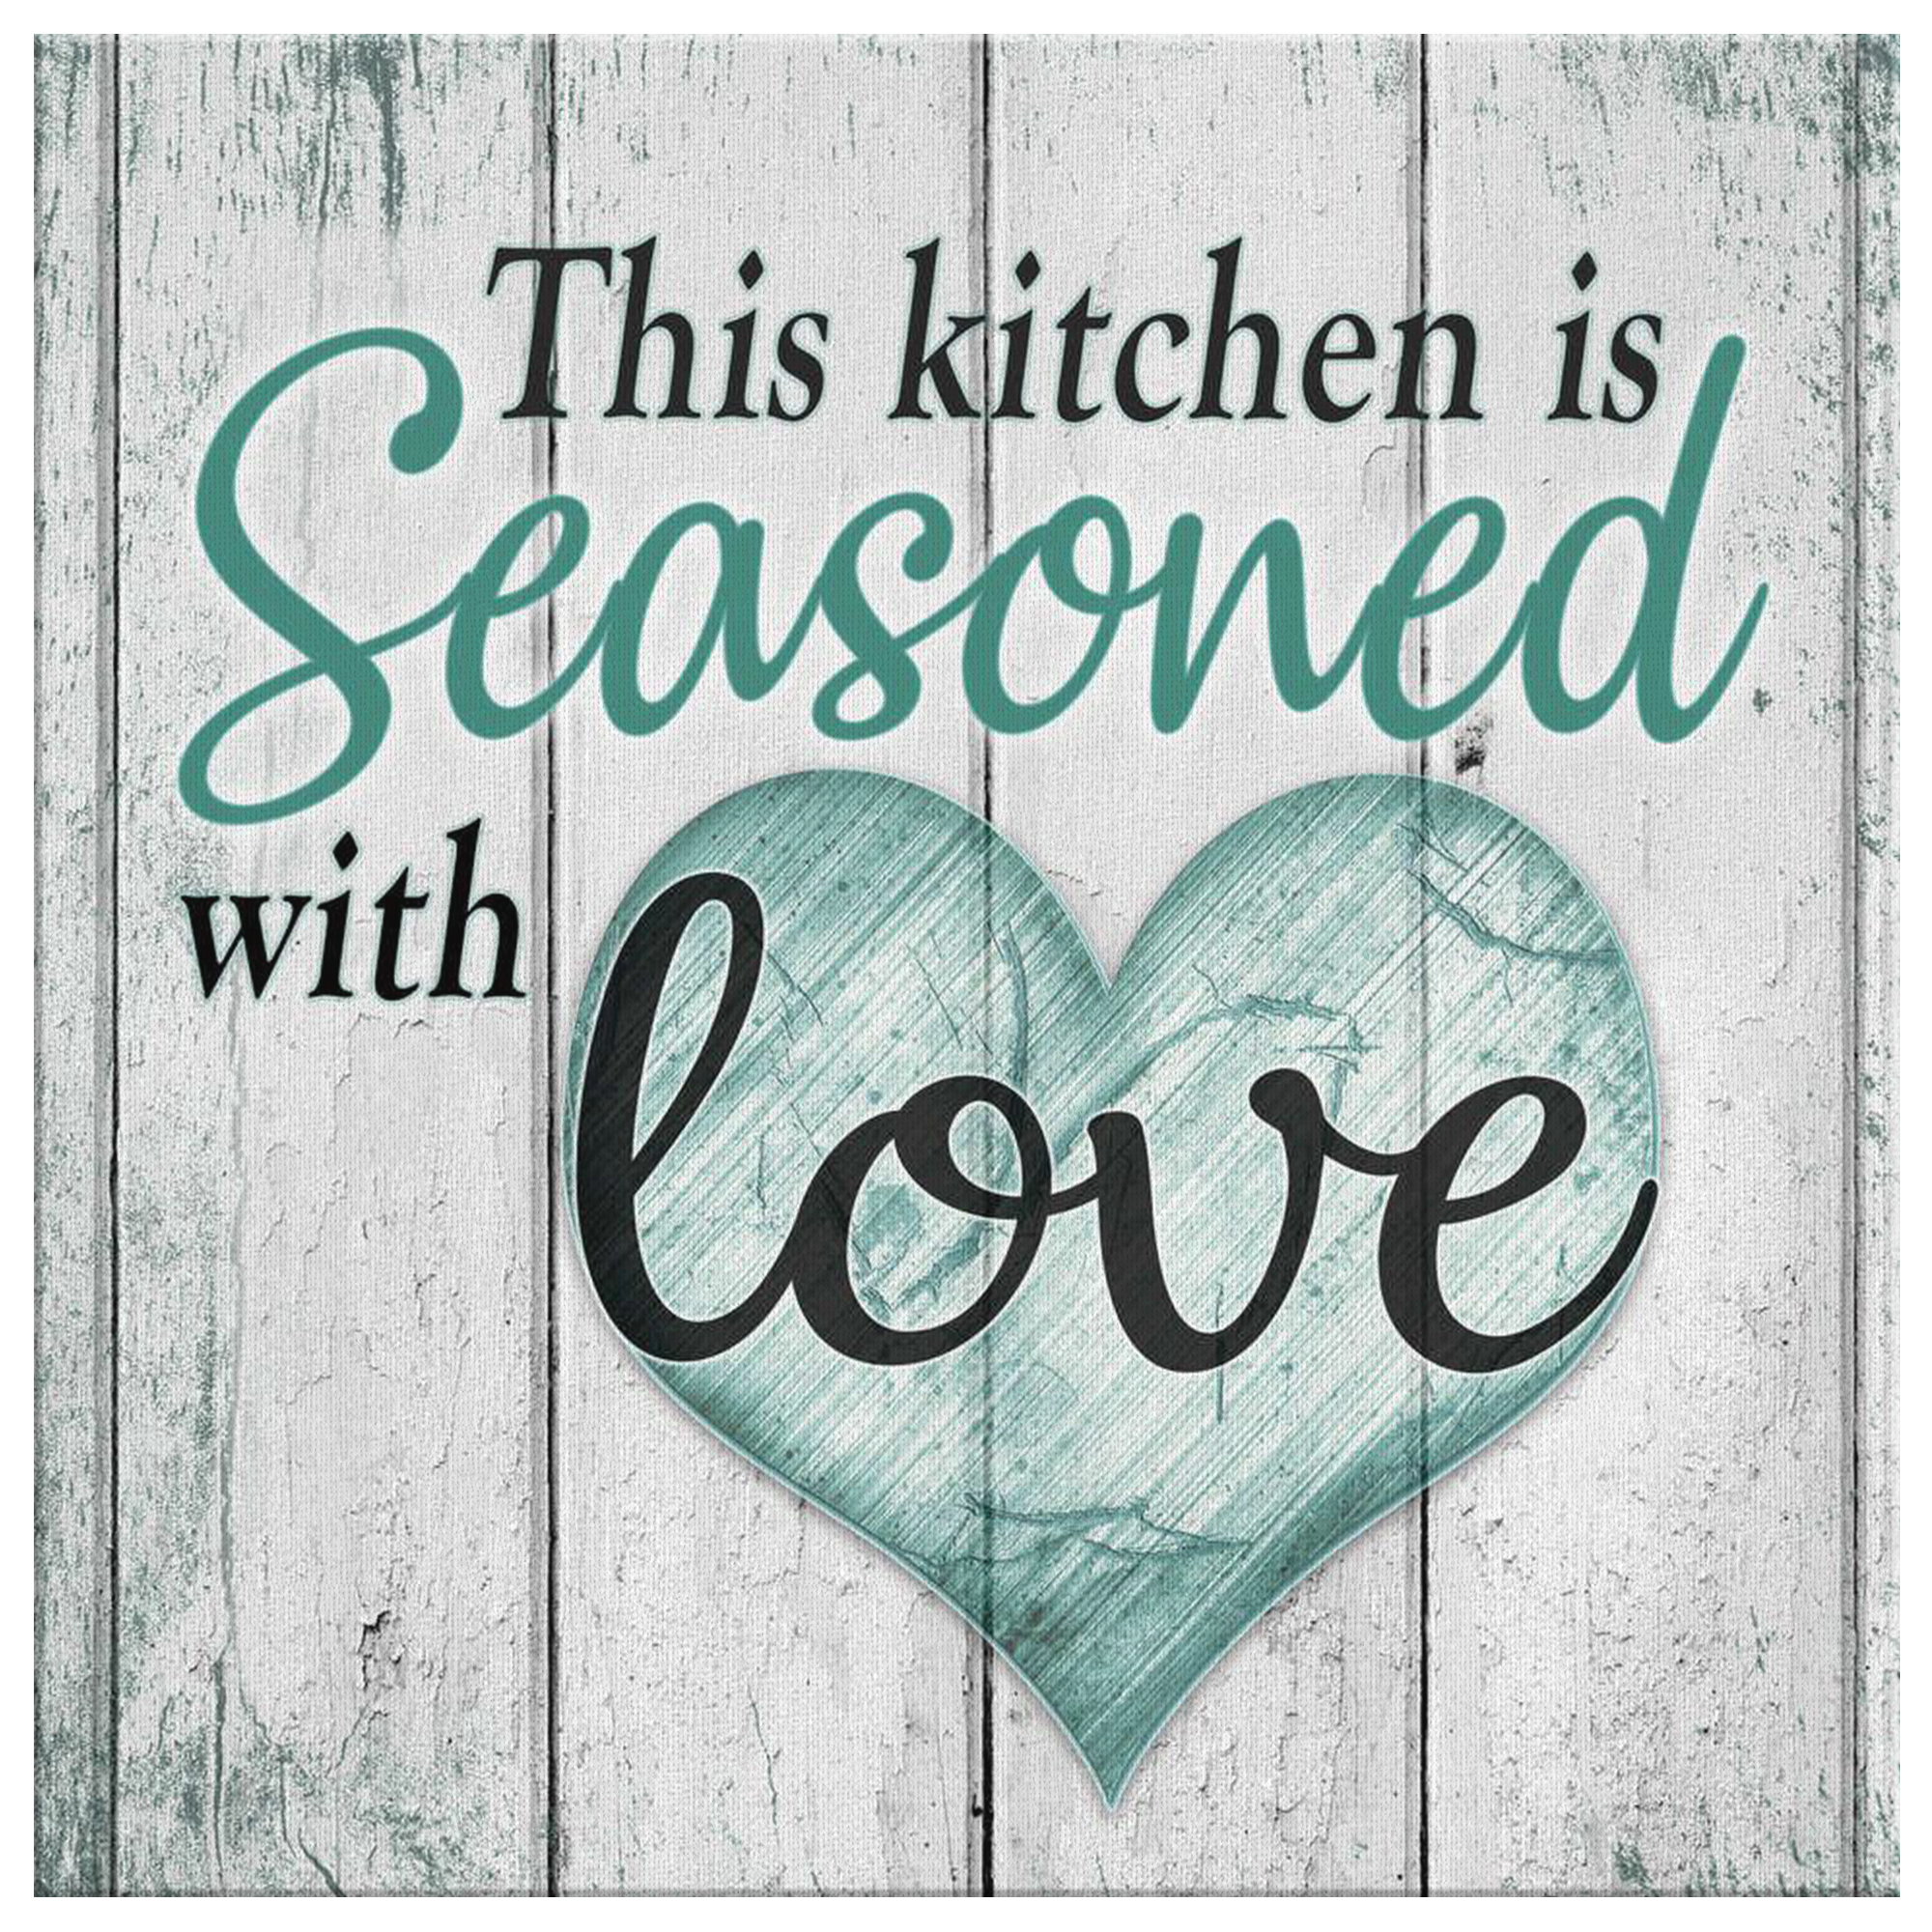 "This Kitchen Is Seasoned With Love" Premium Canvas